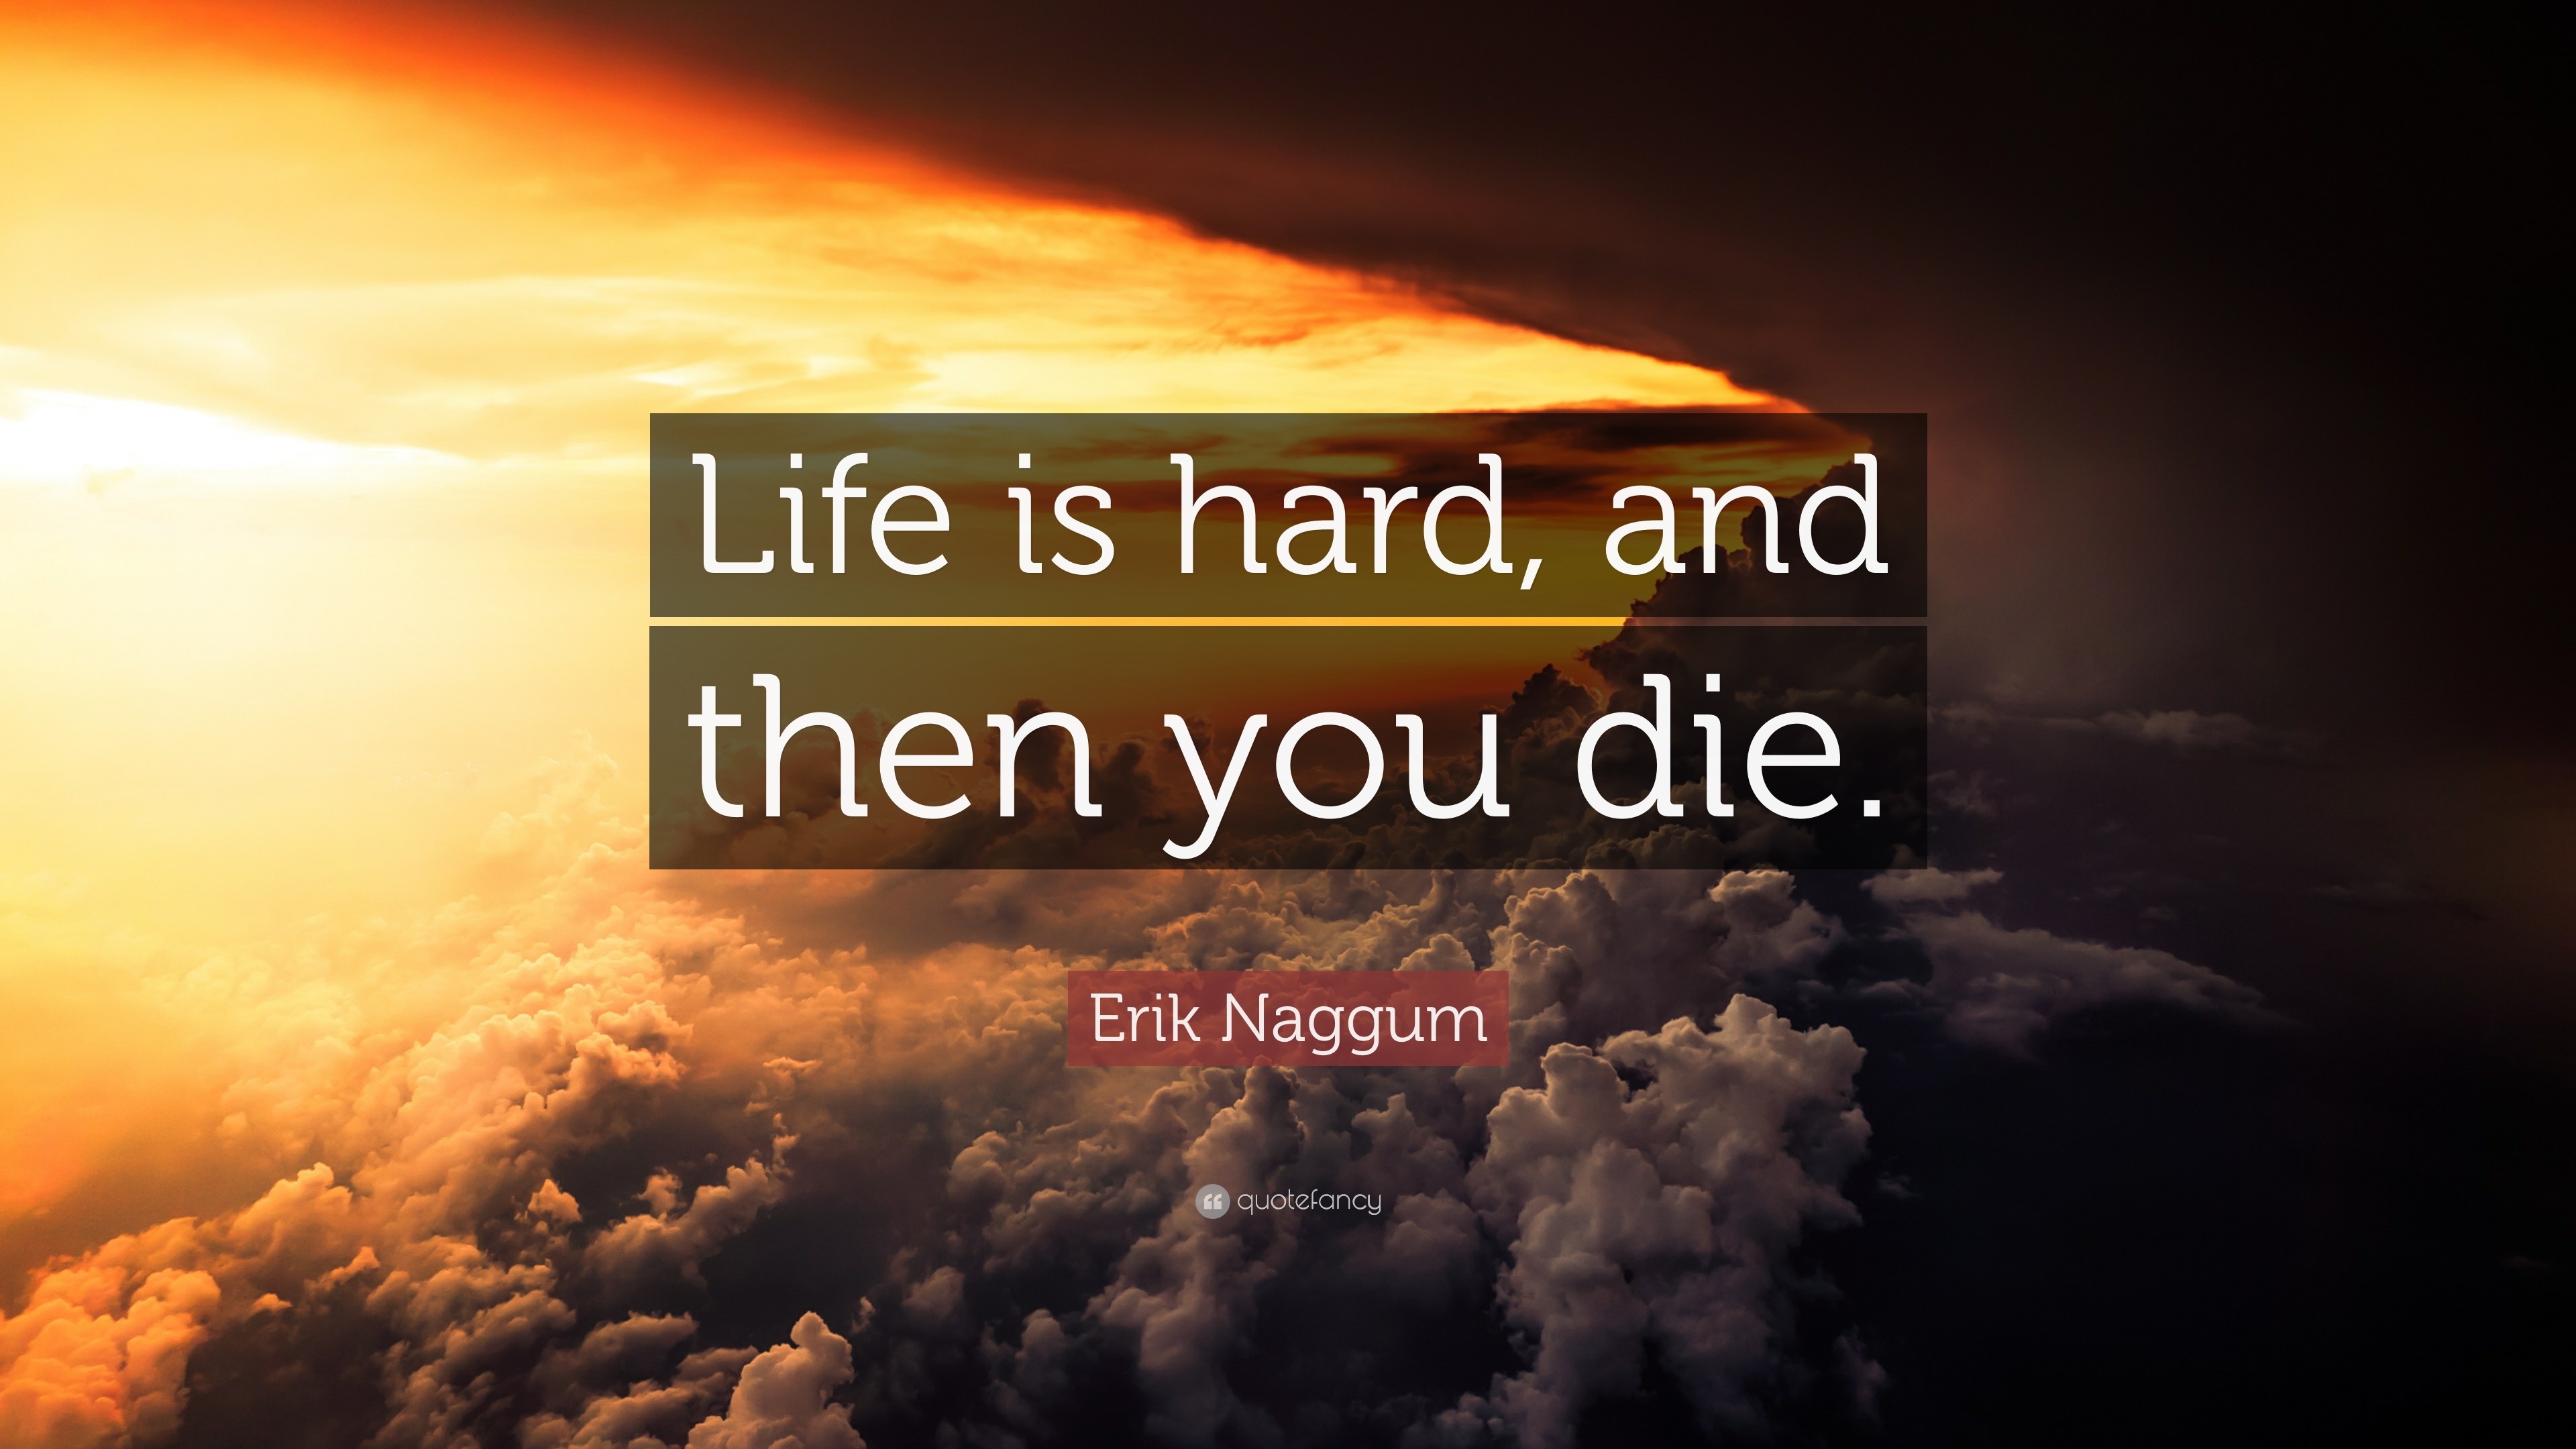 Erik Naggum Quote “Life is hard and then you ”